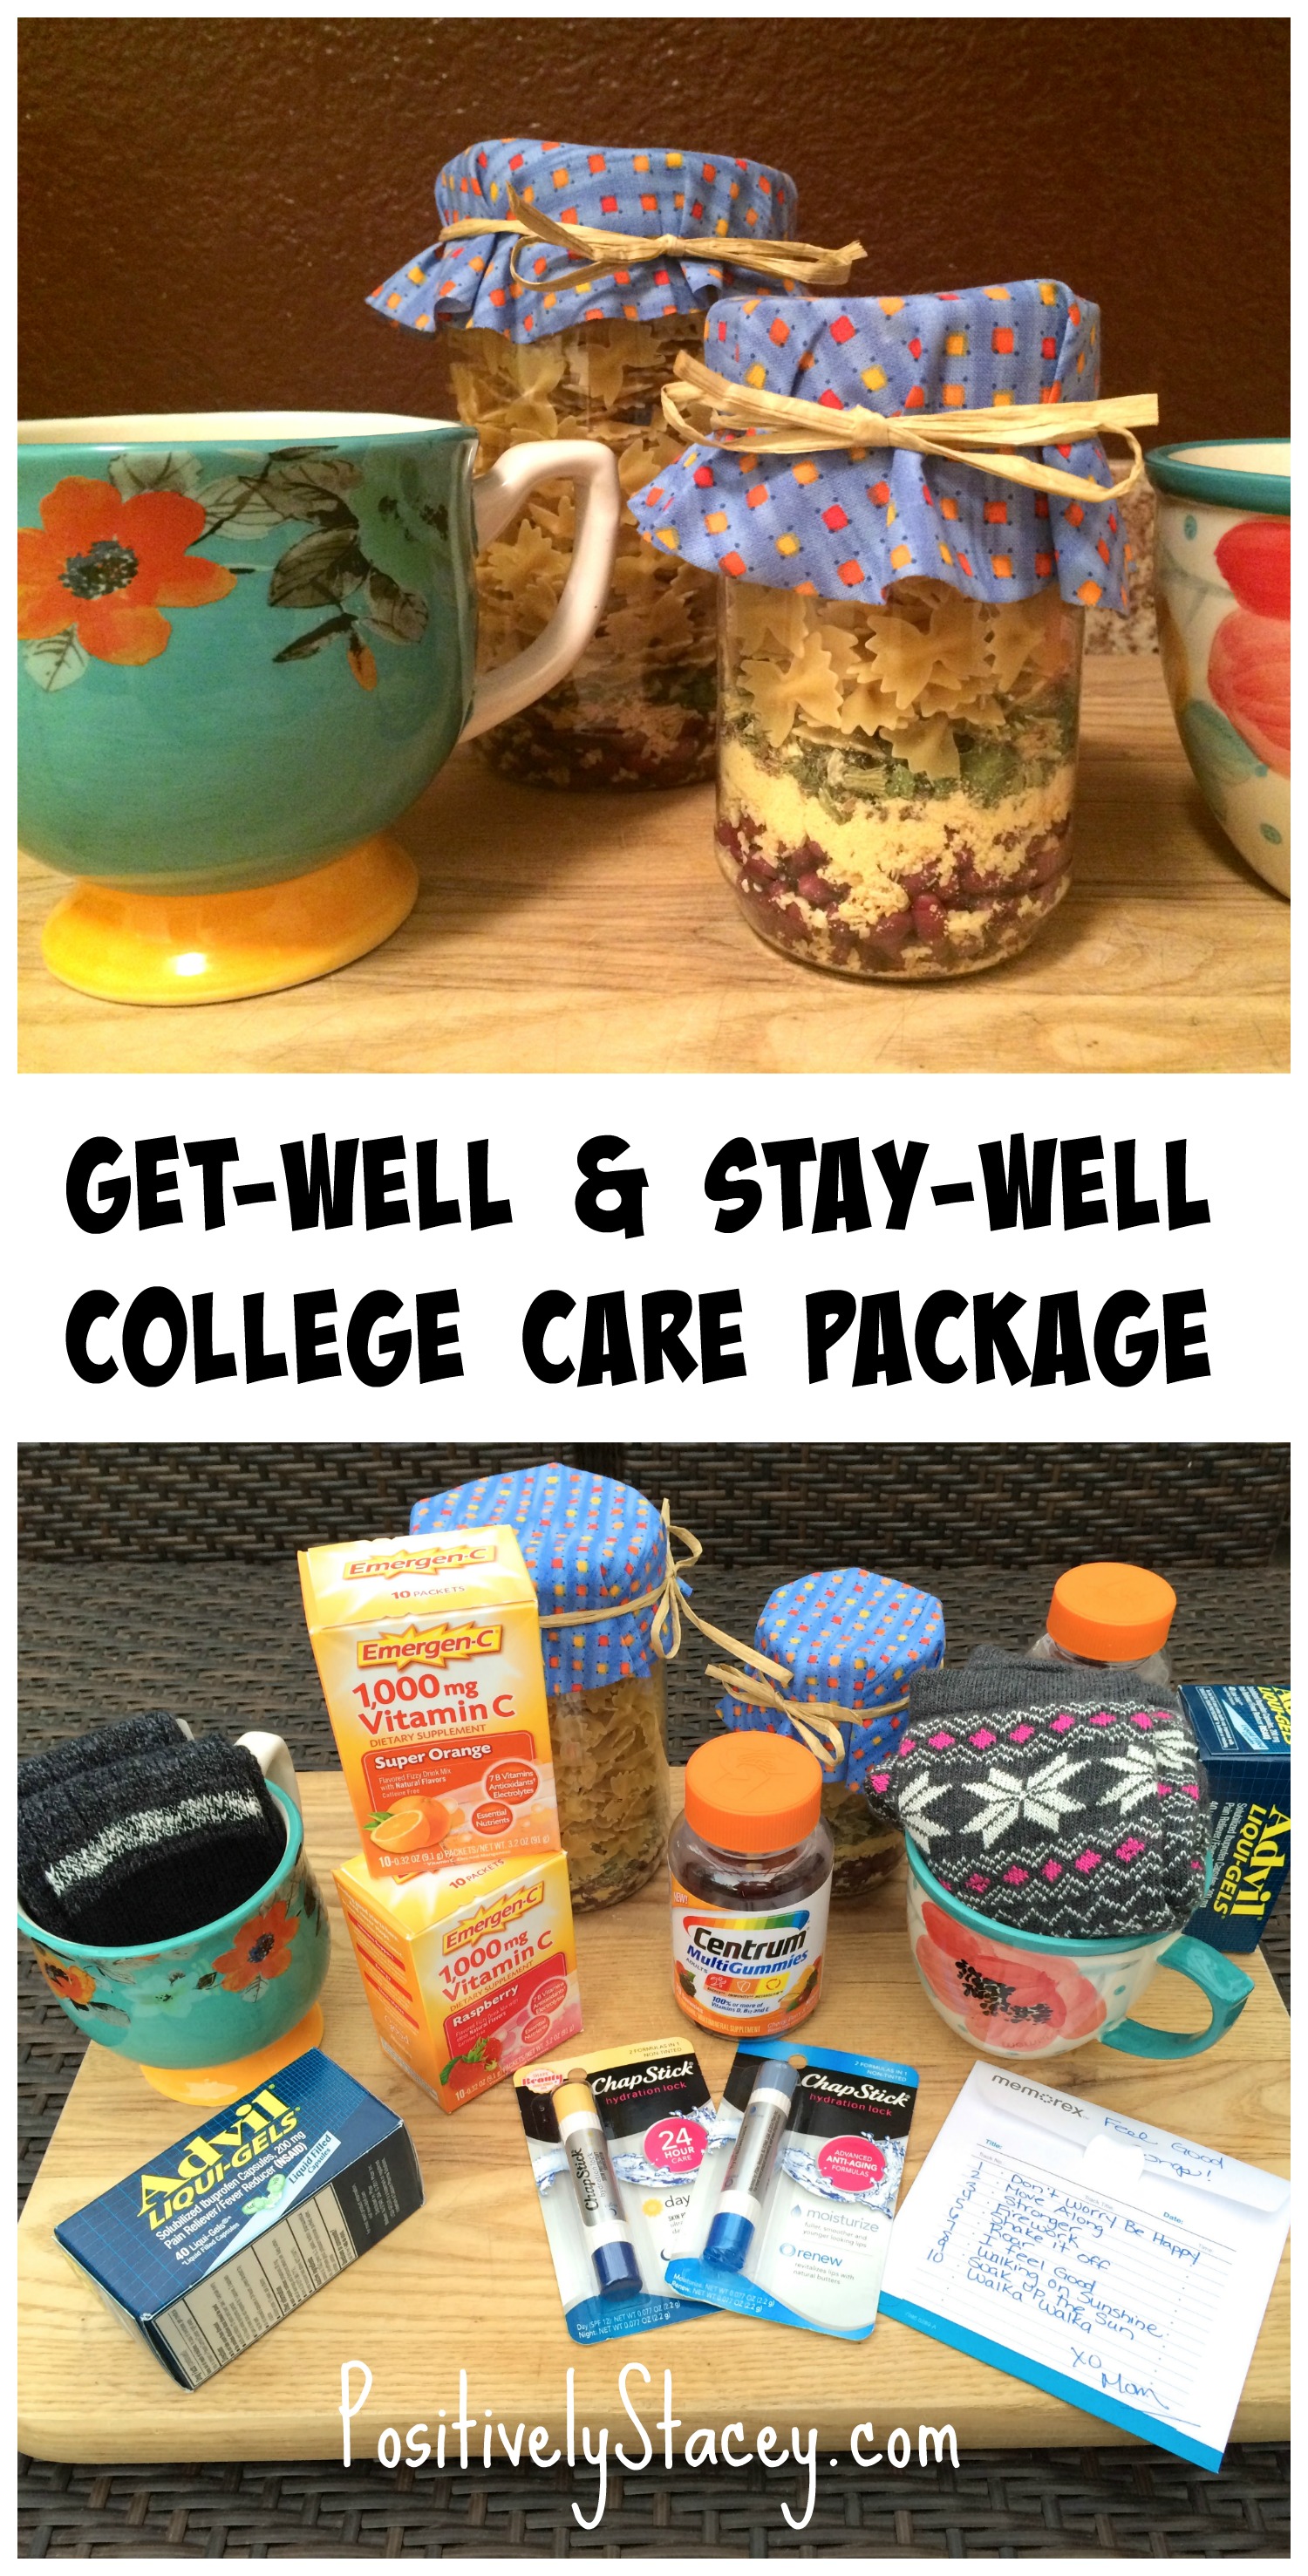 How to put together a Get-Well & Stay-Well College Care Package